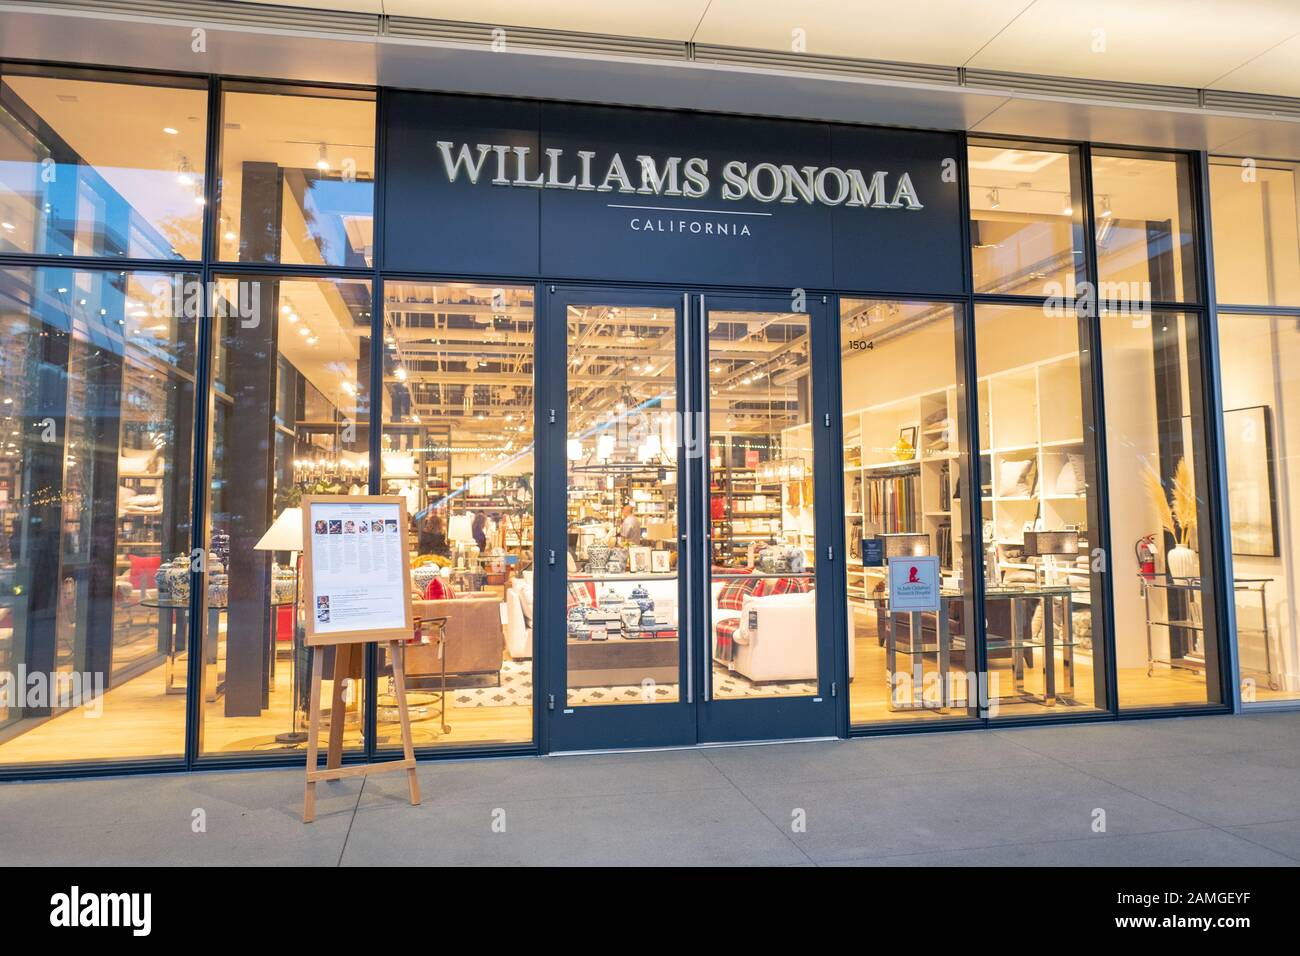 https://c8.alamy.com/comp/2AMGEYF/night-view-of-facade-of-williams-sonoma-store-in-san-ramon-california-november-21-2019-many-stores-expect-increased-traffic-during-the-busy-black-friday-shopping-period-2AMGEYF.jpg